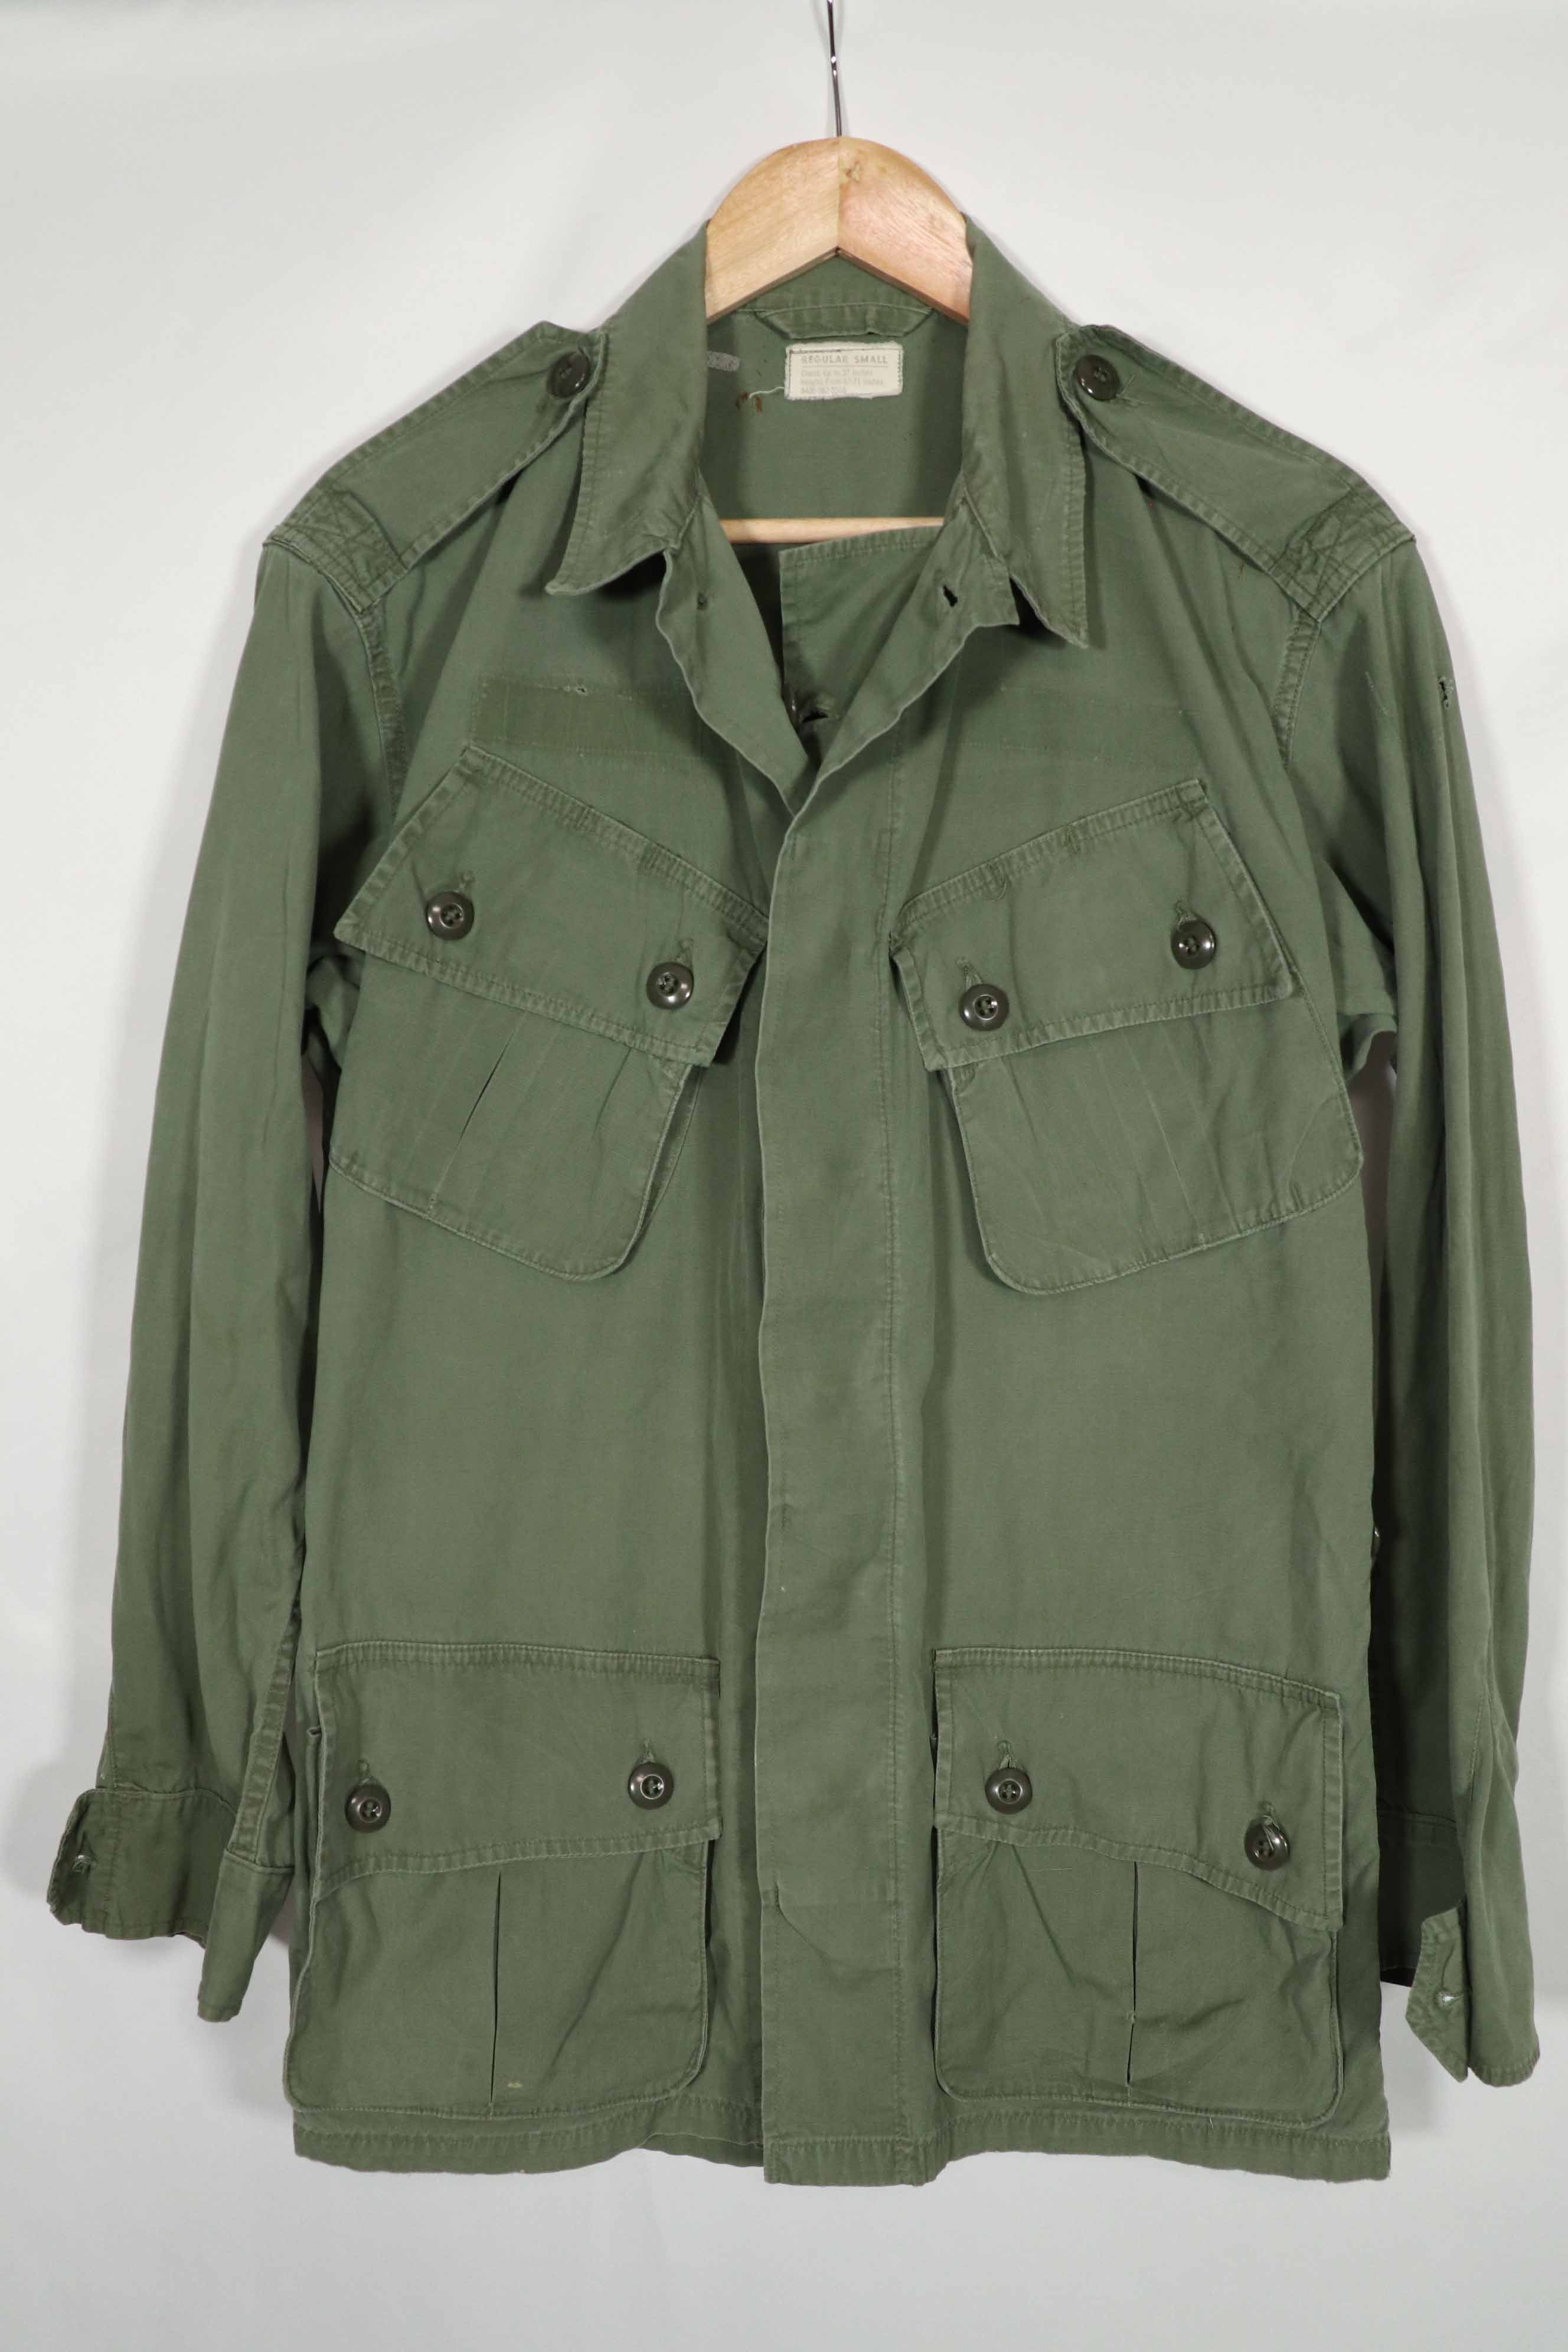 Real 1963 1st Model Jungle Fatigue Jacket R-S Size Used